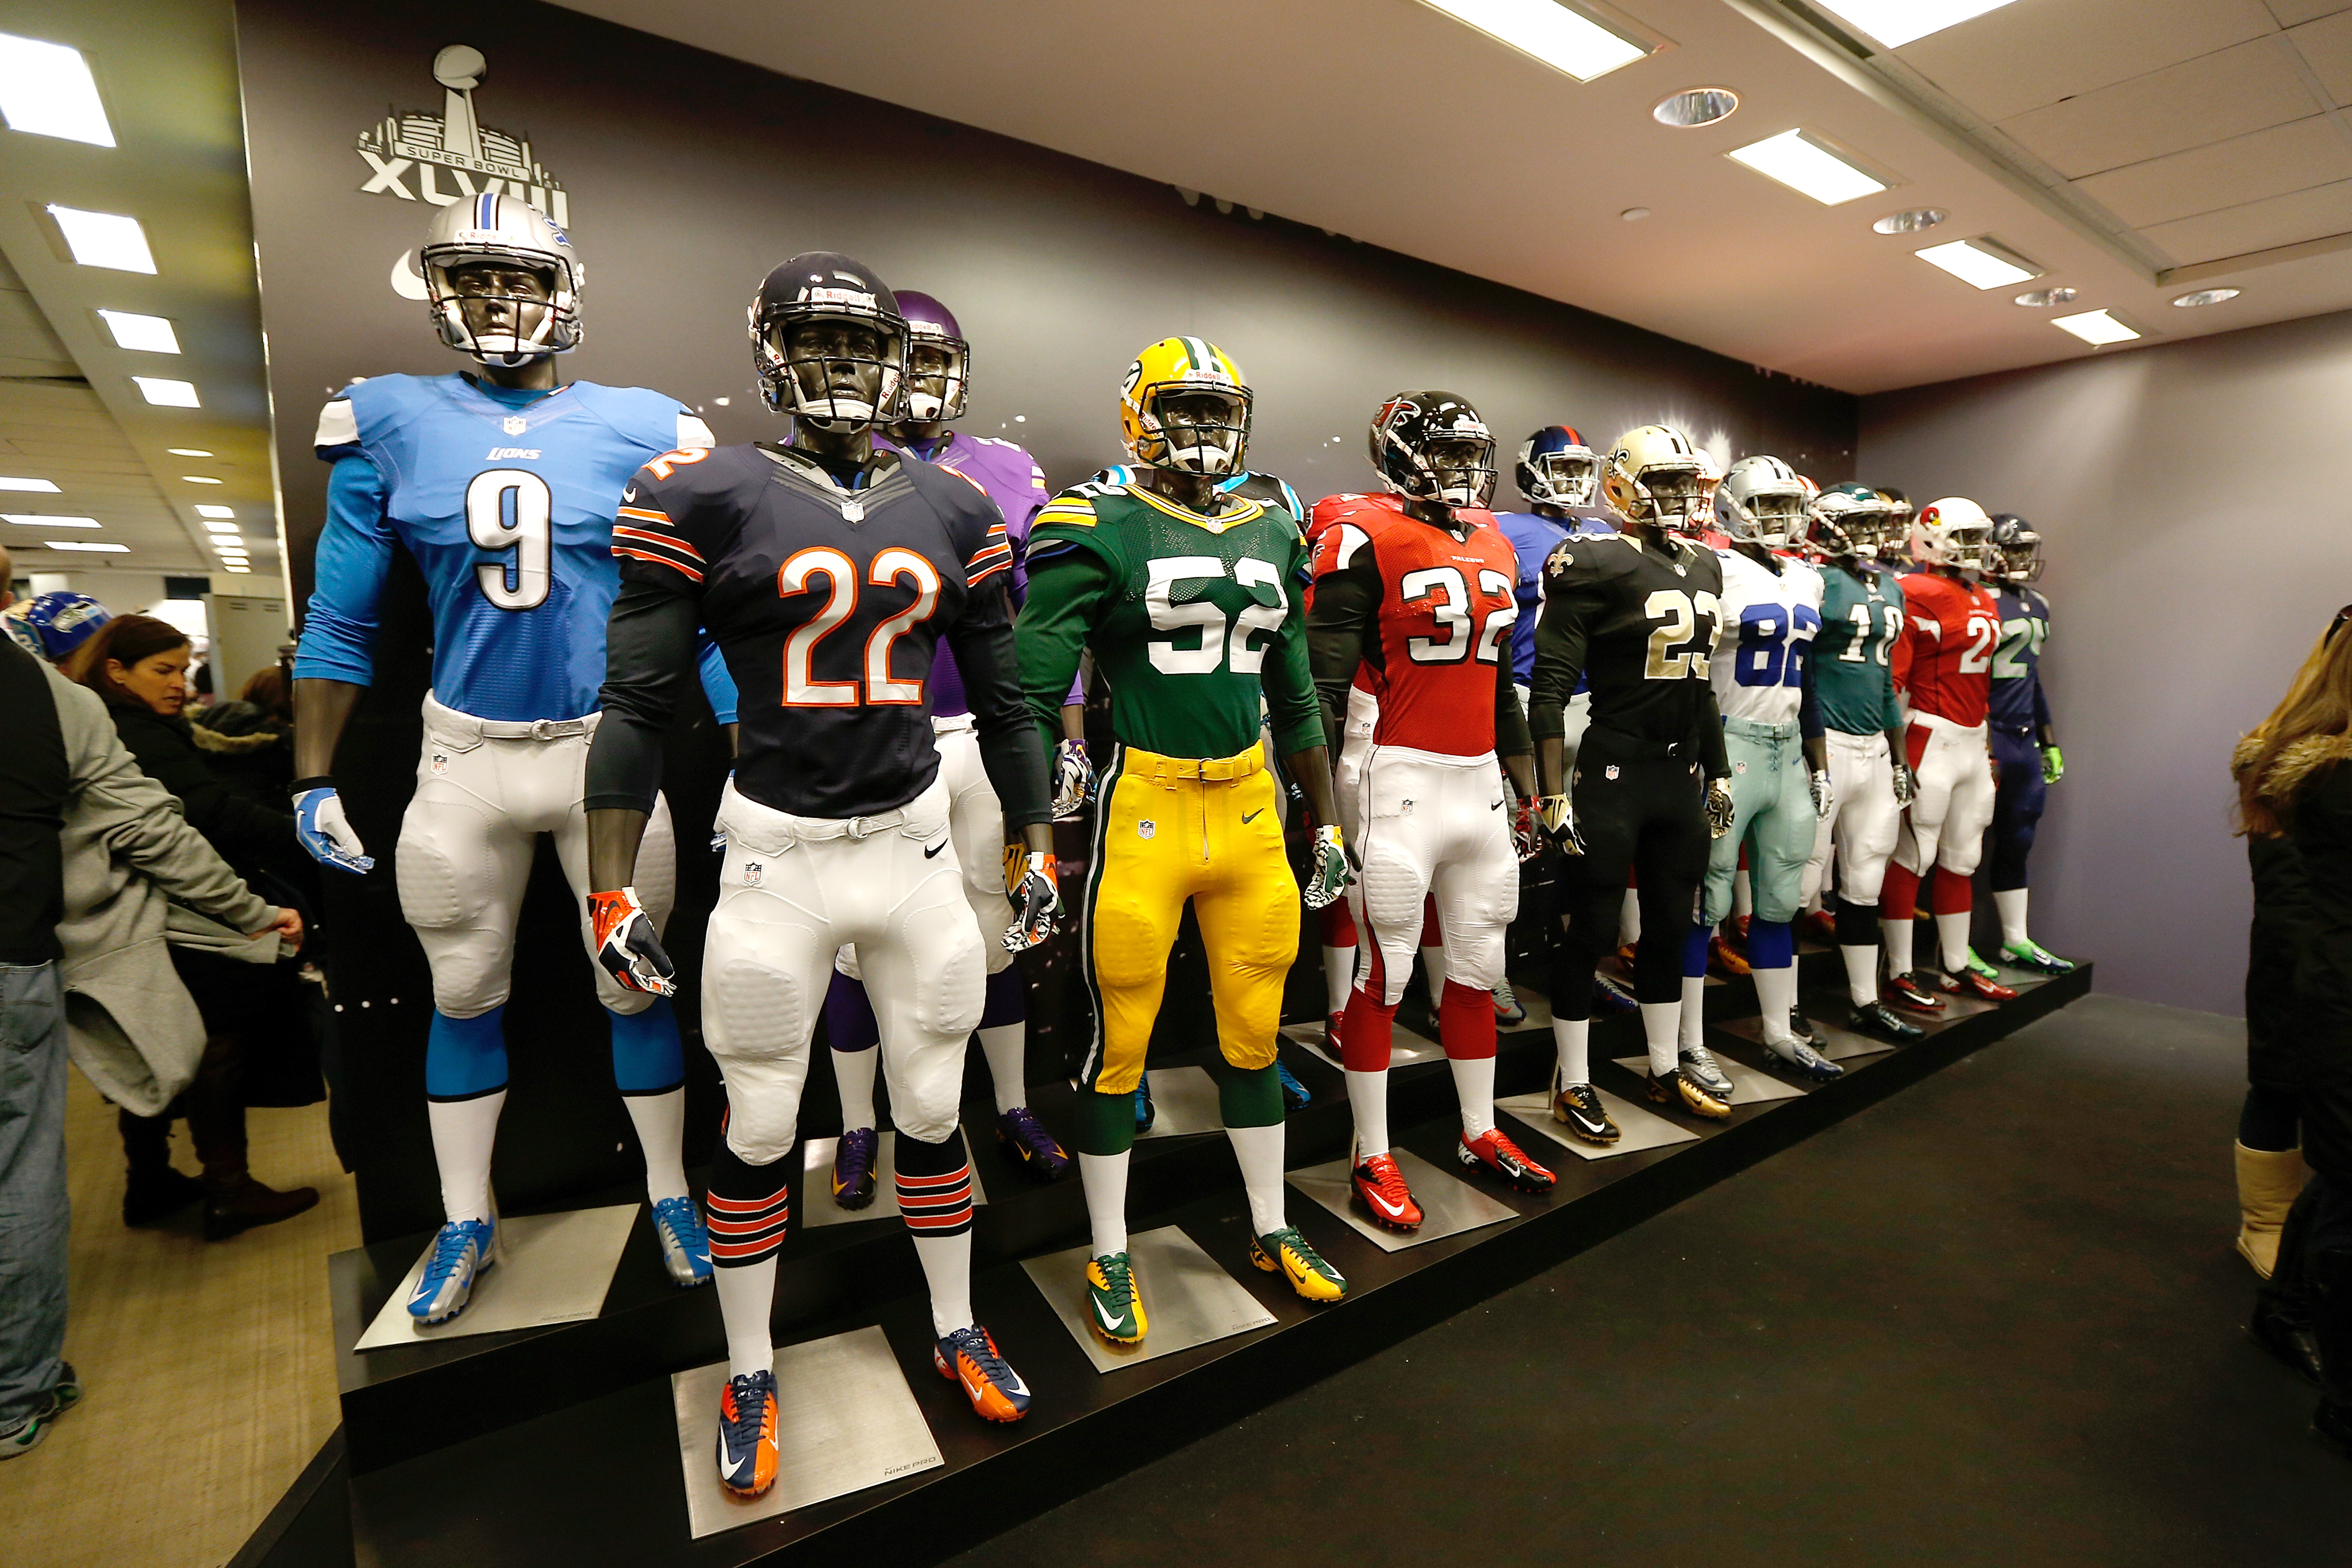 NFL Jerseys Cost $295, Thanks to Price Increase from Nike | Time